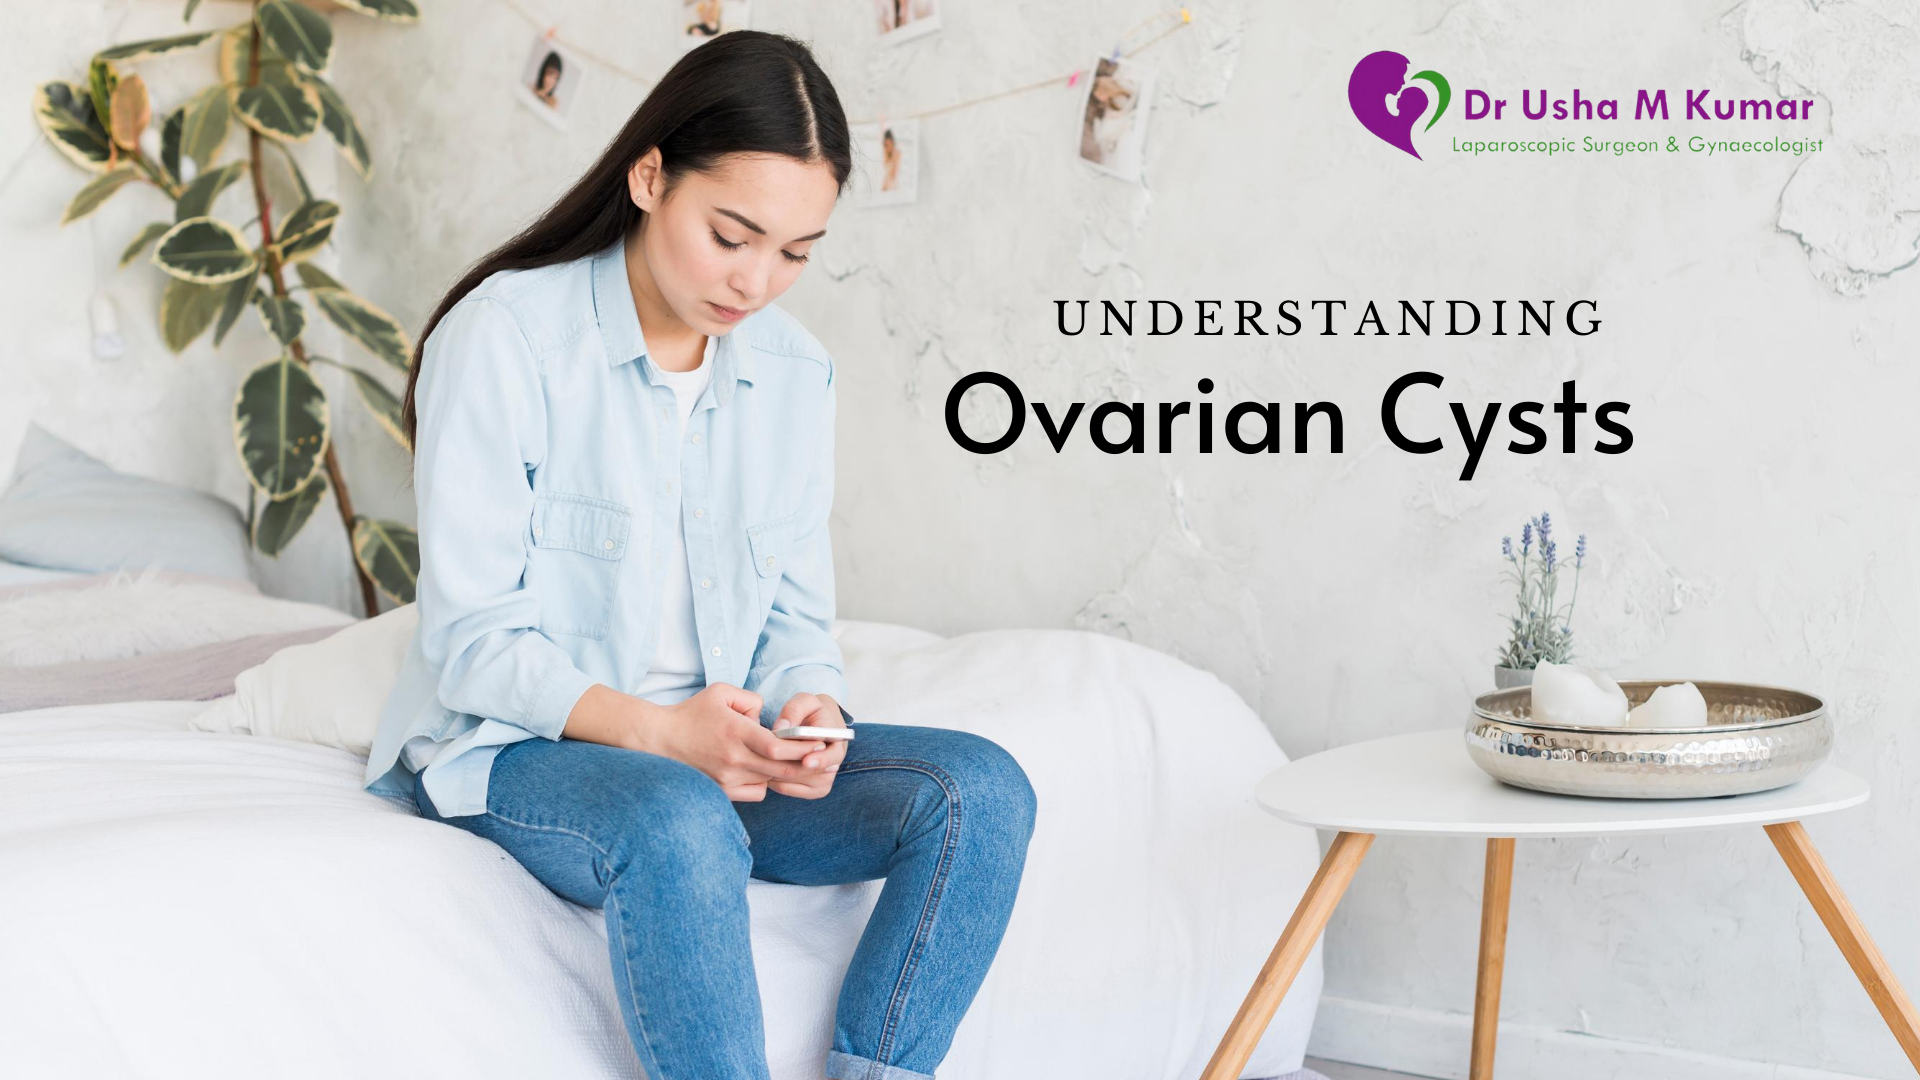 Ovarian Cysts - best gynecologist in Delhi for ovarian cyst